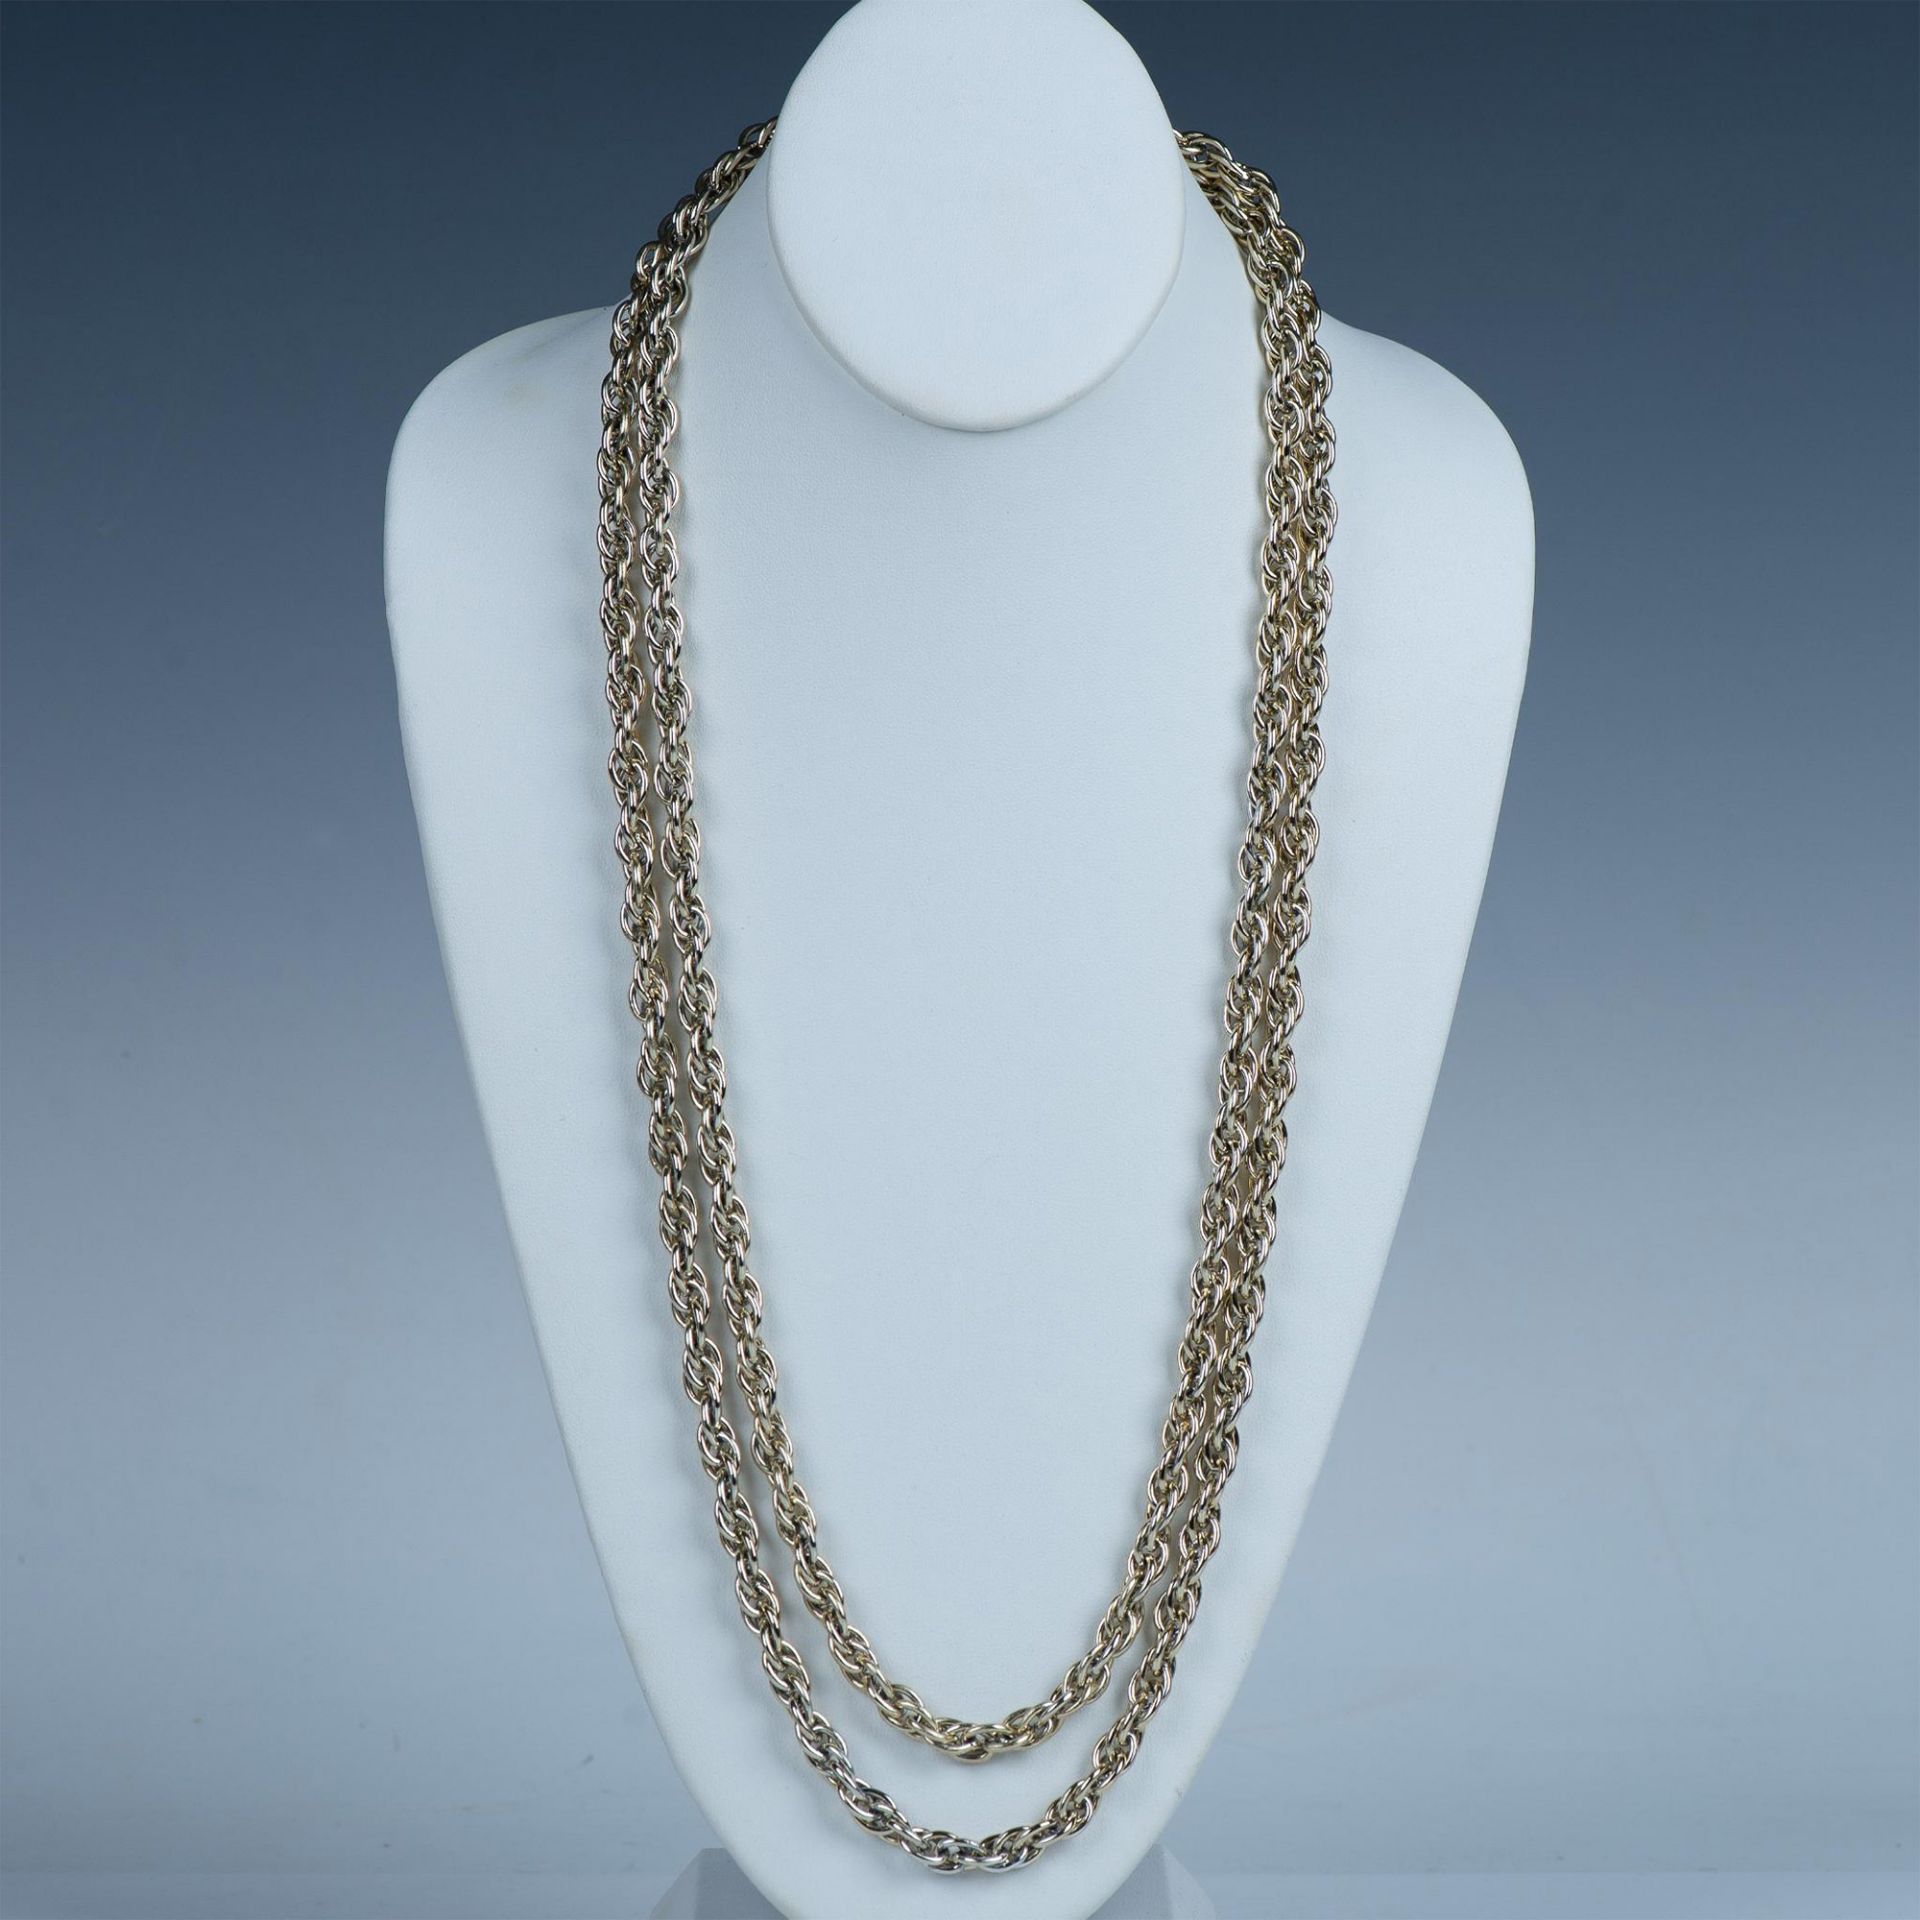 Long Twisted Gold Metal Chain - Image 6 of 6